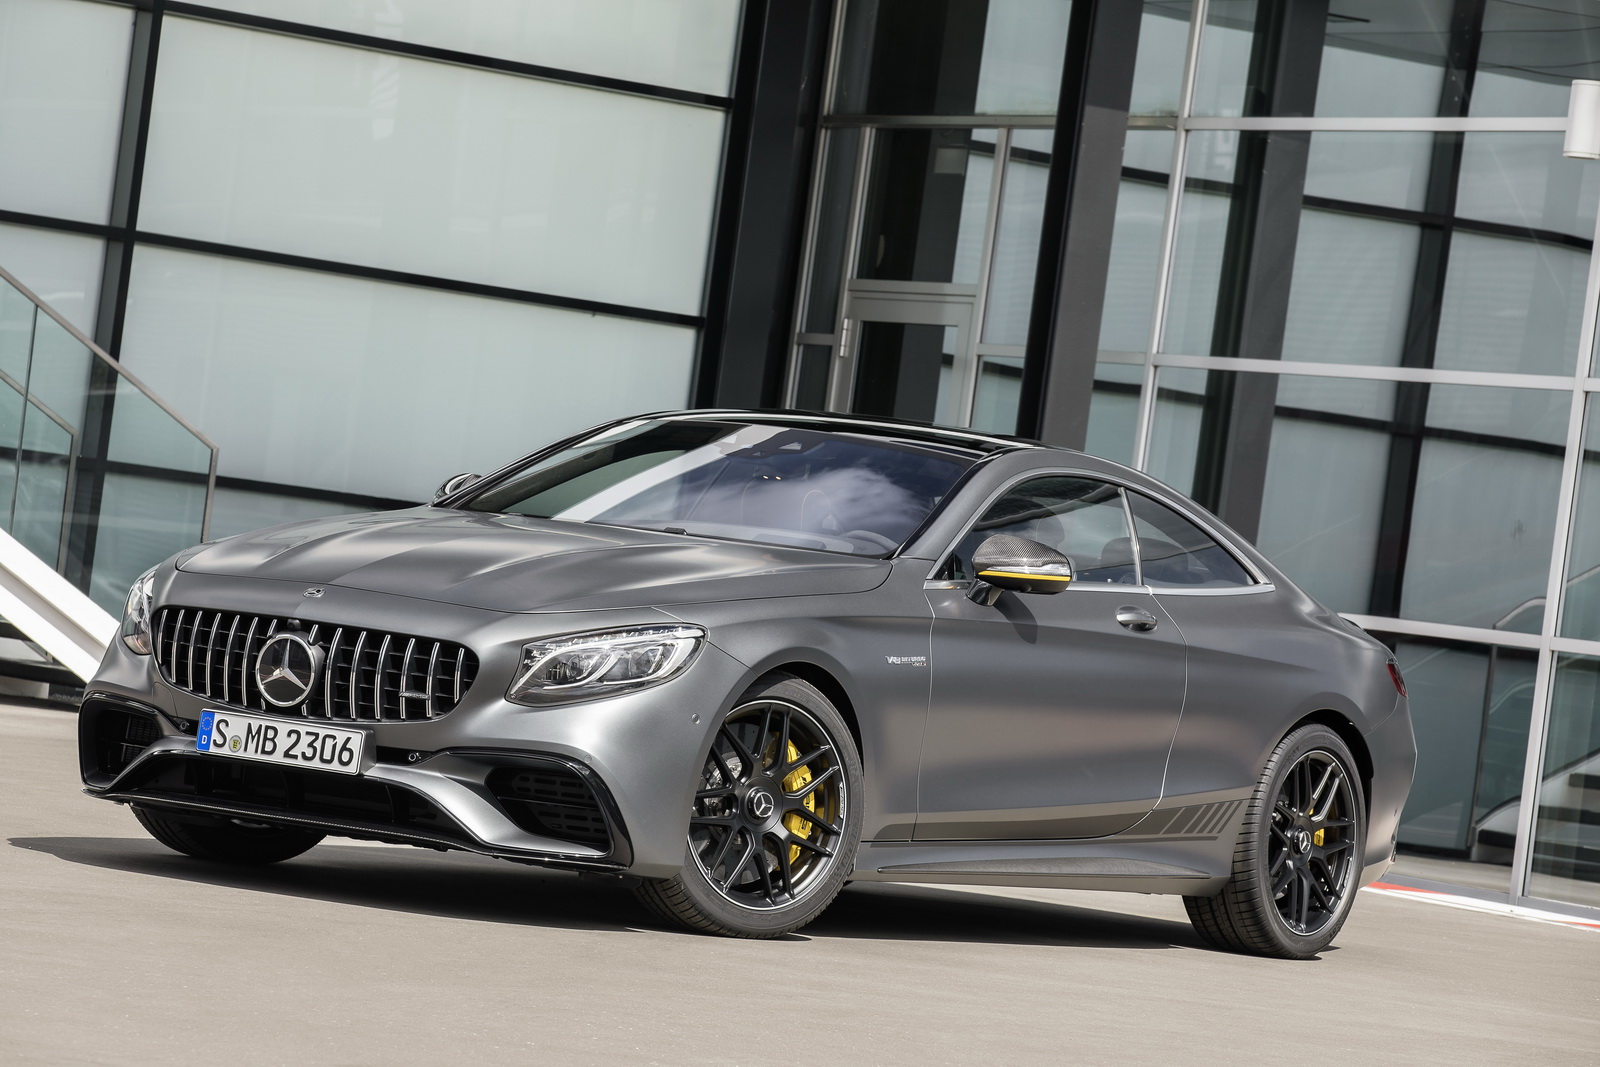 Mercedes Benz S Class Coupe And Cabriolet To Be Dropped To Save Costs Carscoops